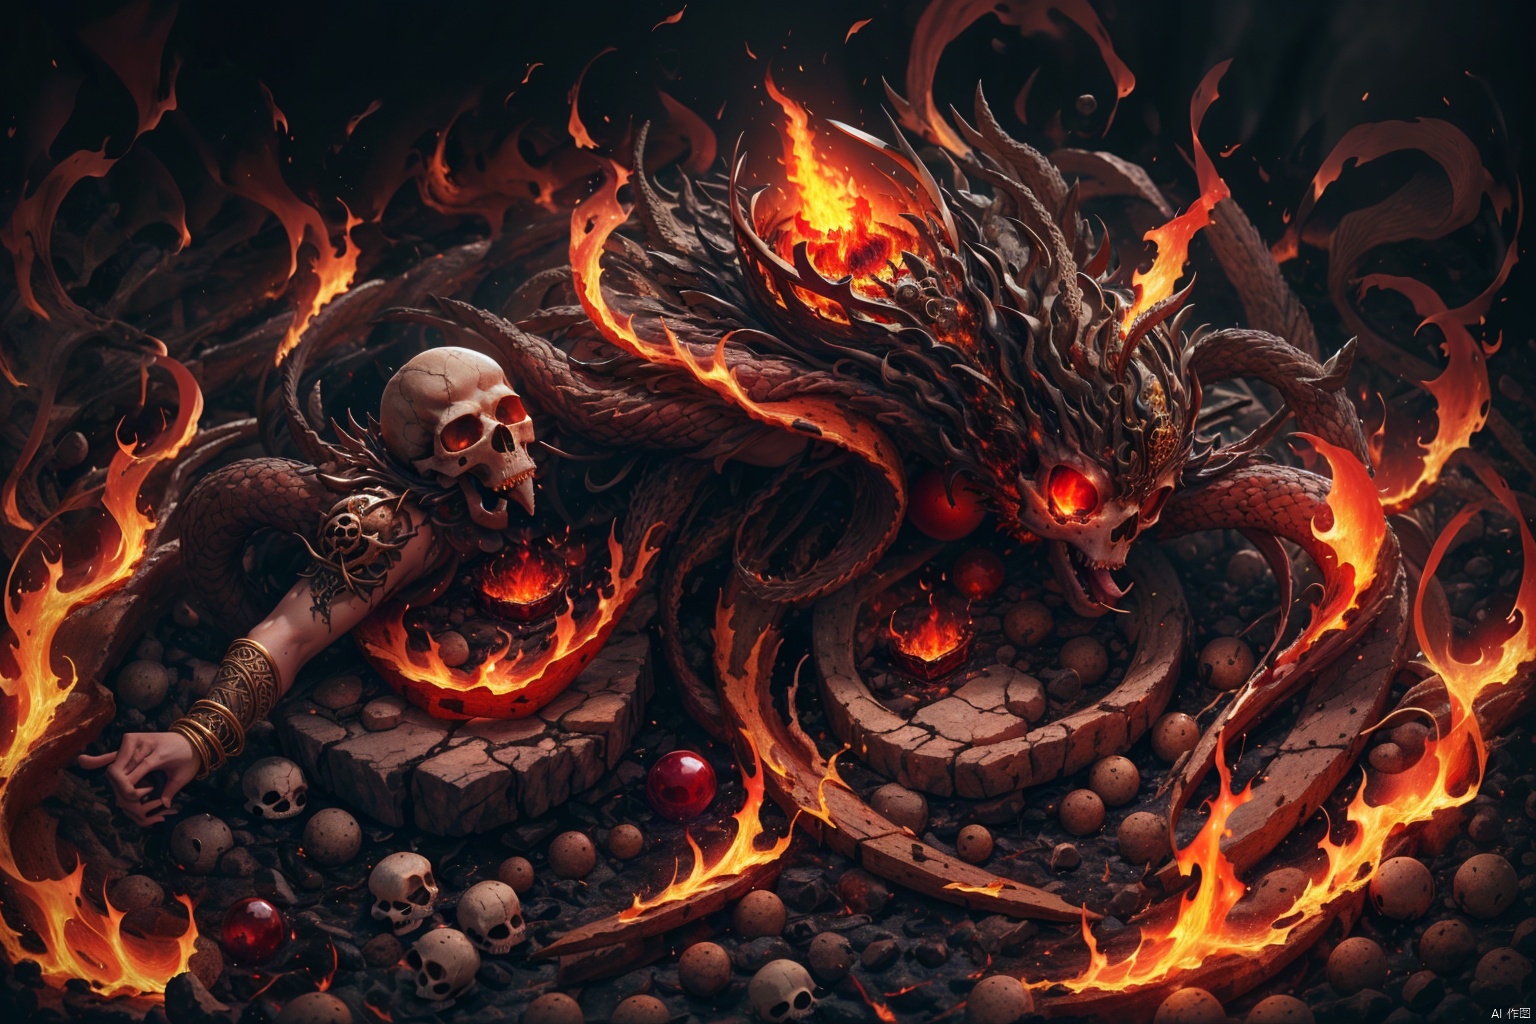  Masterpiece, high detail, 8K, high-definition,(Skull Mage), a skull carved with runes, white and red edged bones, with fiery flames burning in his eyes. The flames seeped out of the Skull Mage's mouth, and he wore a gorgeous robe with magical runes painted on it. The flame in the lower half of the robe was shaped like a dancing tongue, with a staff inlaid with red gemstones and adorned with a golden gemstone bracelet pendant. The background was composed of large pieces of burning flames, presenting a sense of deep red, orange, and bright yellow layering, The shape of flames is twisted and messy, with strong contrast, cinematic lighting effects, depth of field, sophistication, and science fiction

